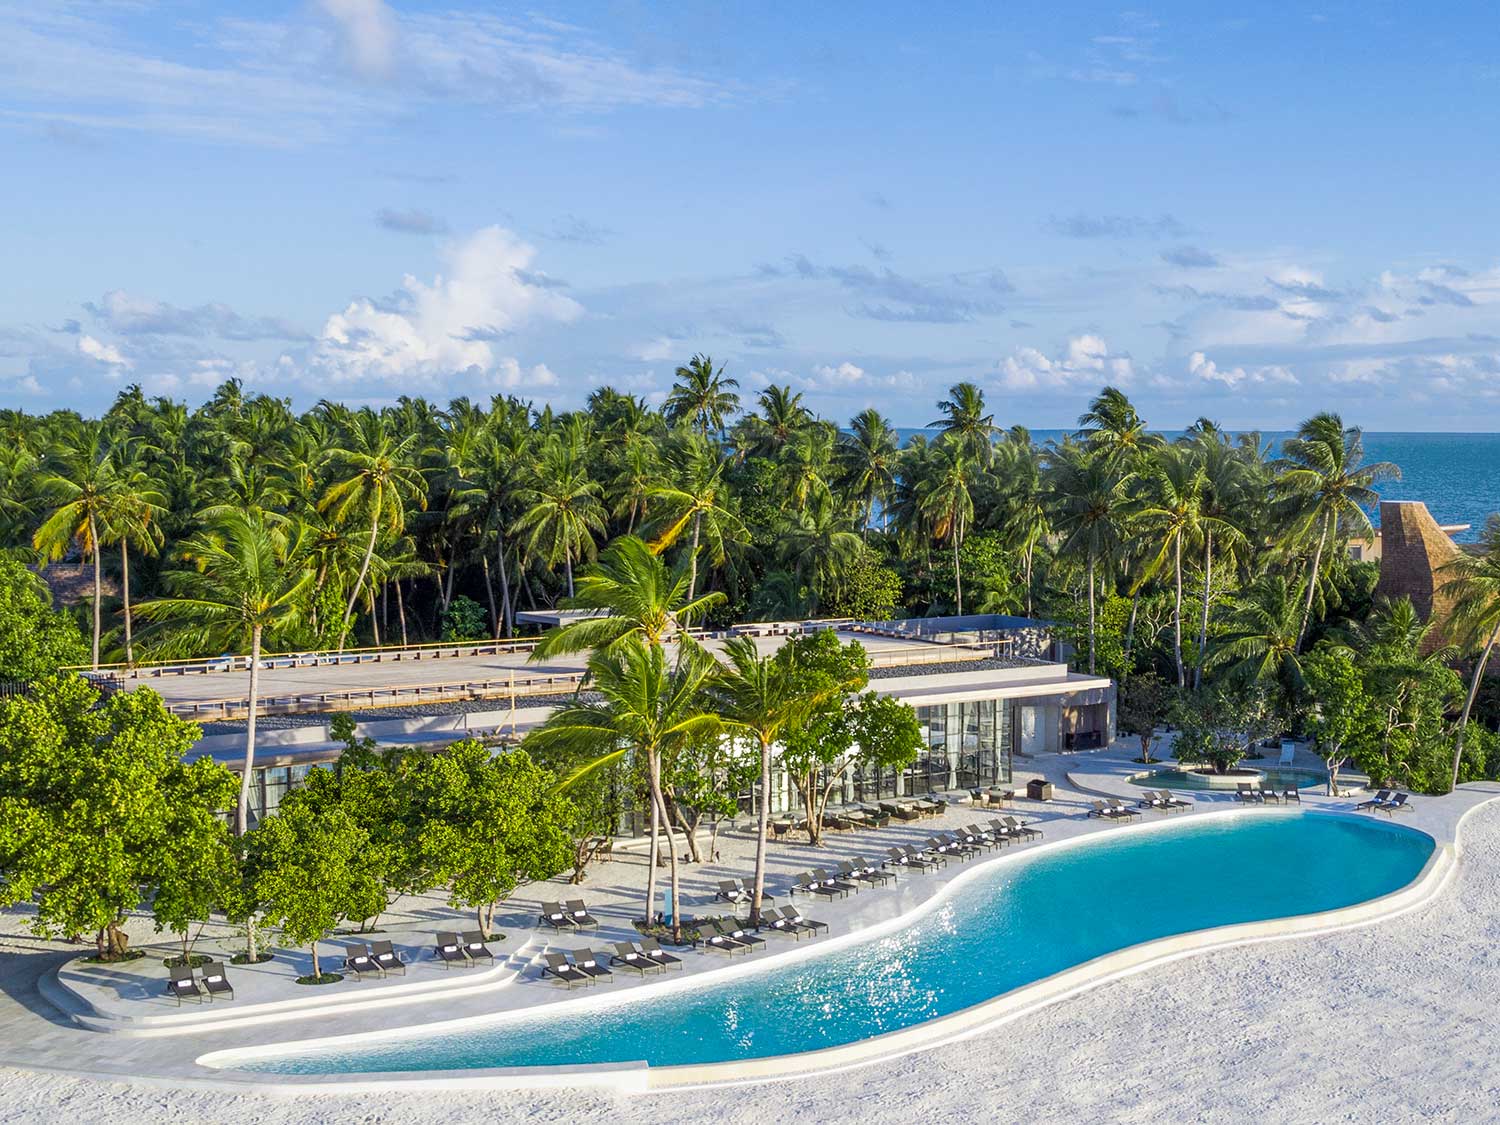 A large beach resort pool surrounded by palm trees.